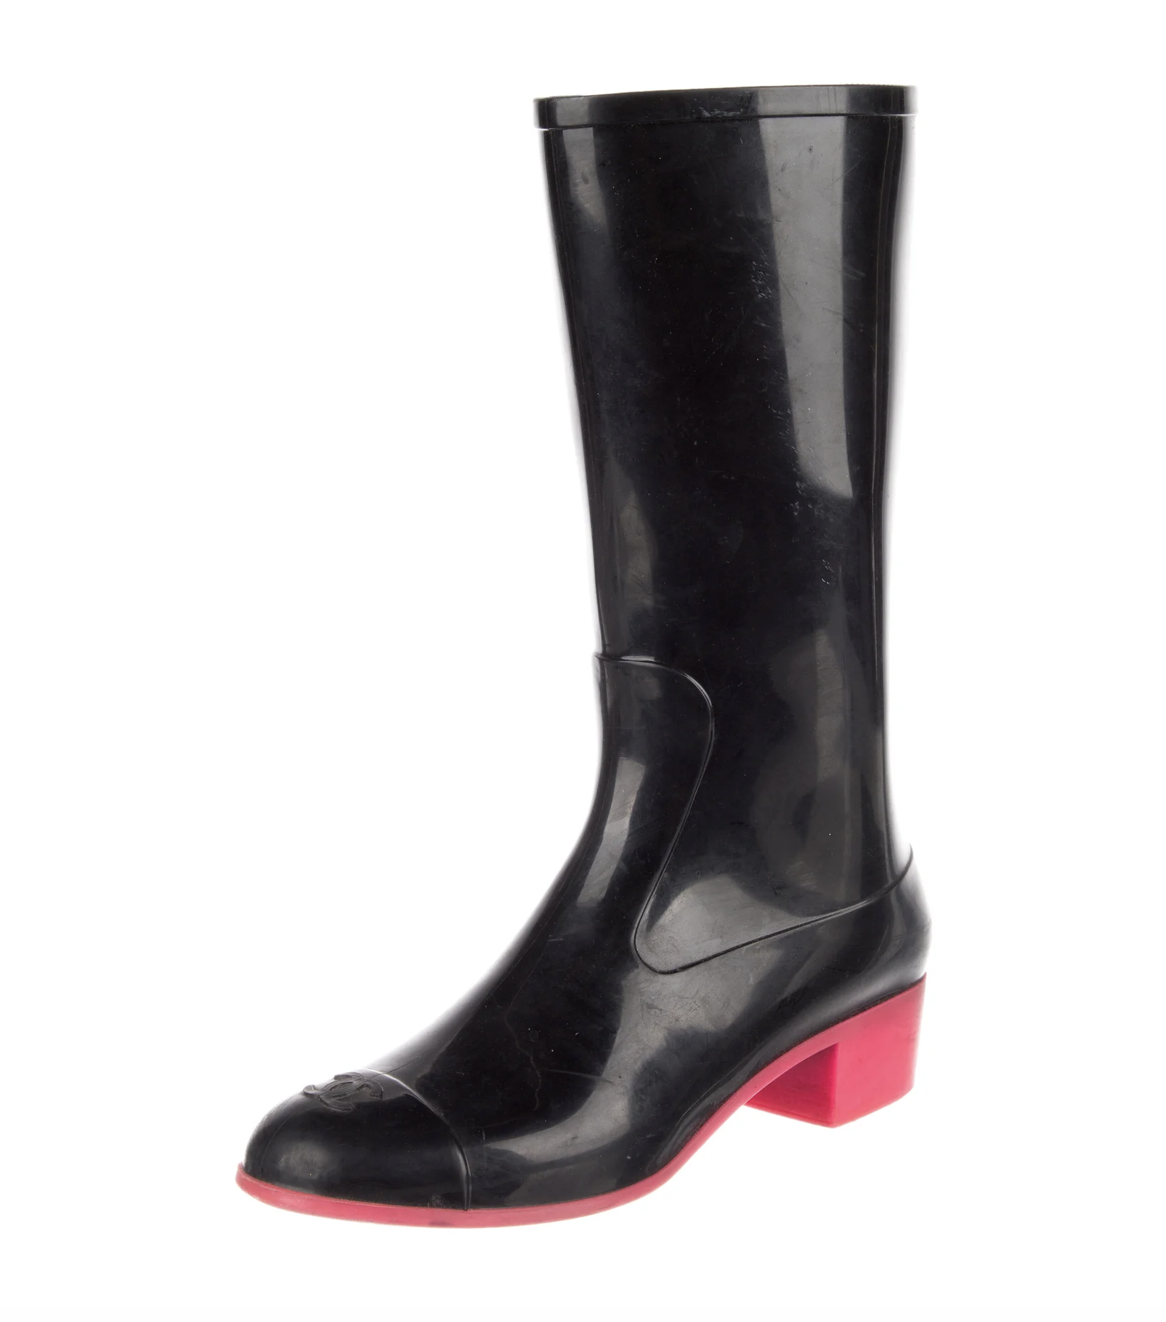 CHANEL VINTAGE BLACK / PINK RUBBER CC TALL RAIN BOOTS 39